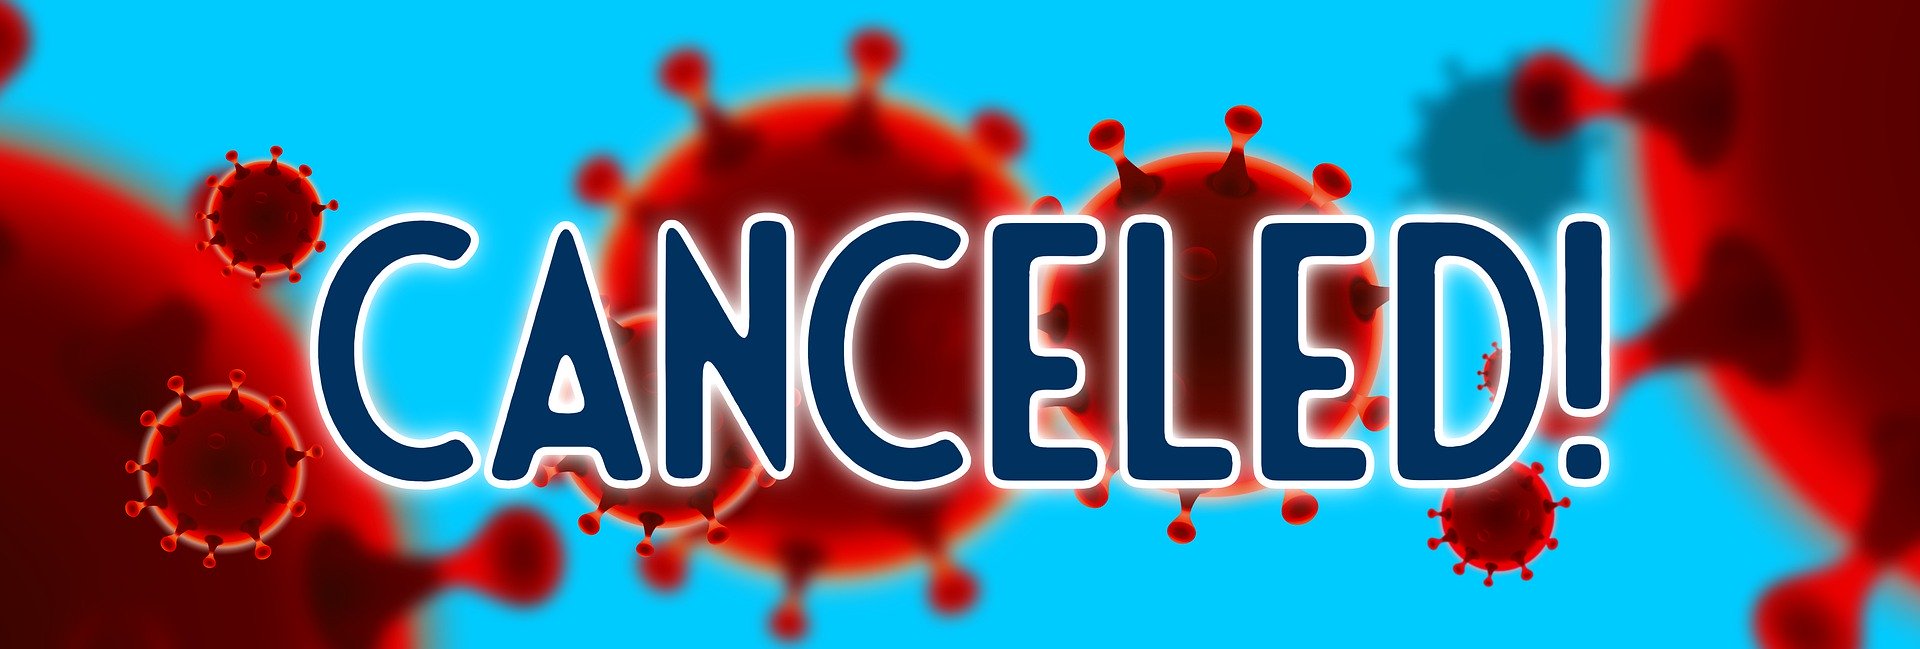 Red sphere meant to depict the coronavirus with the word "Canceled"